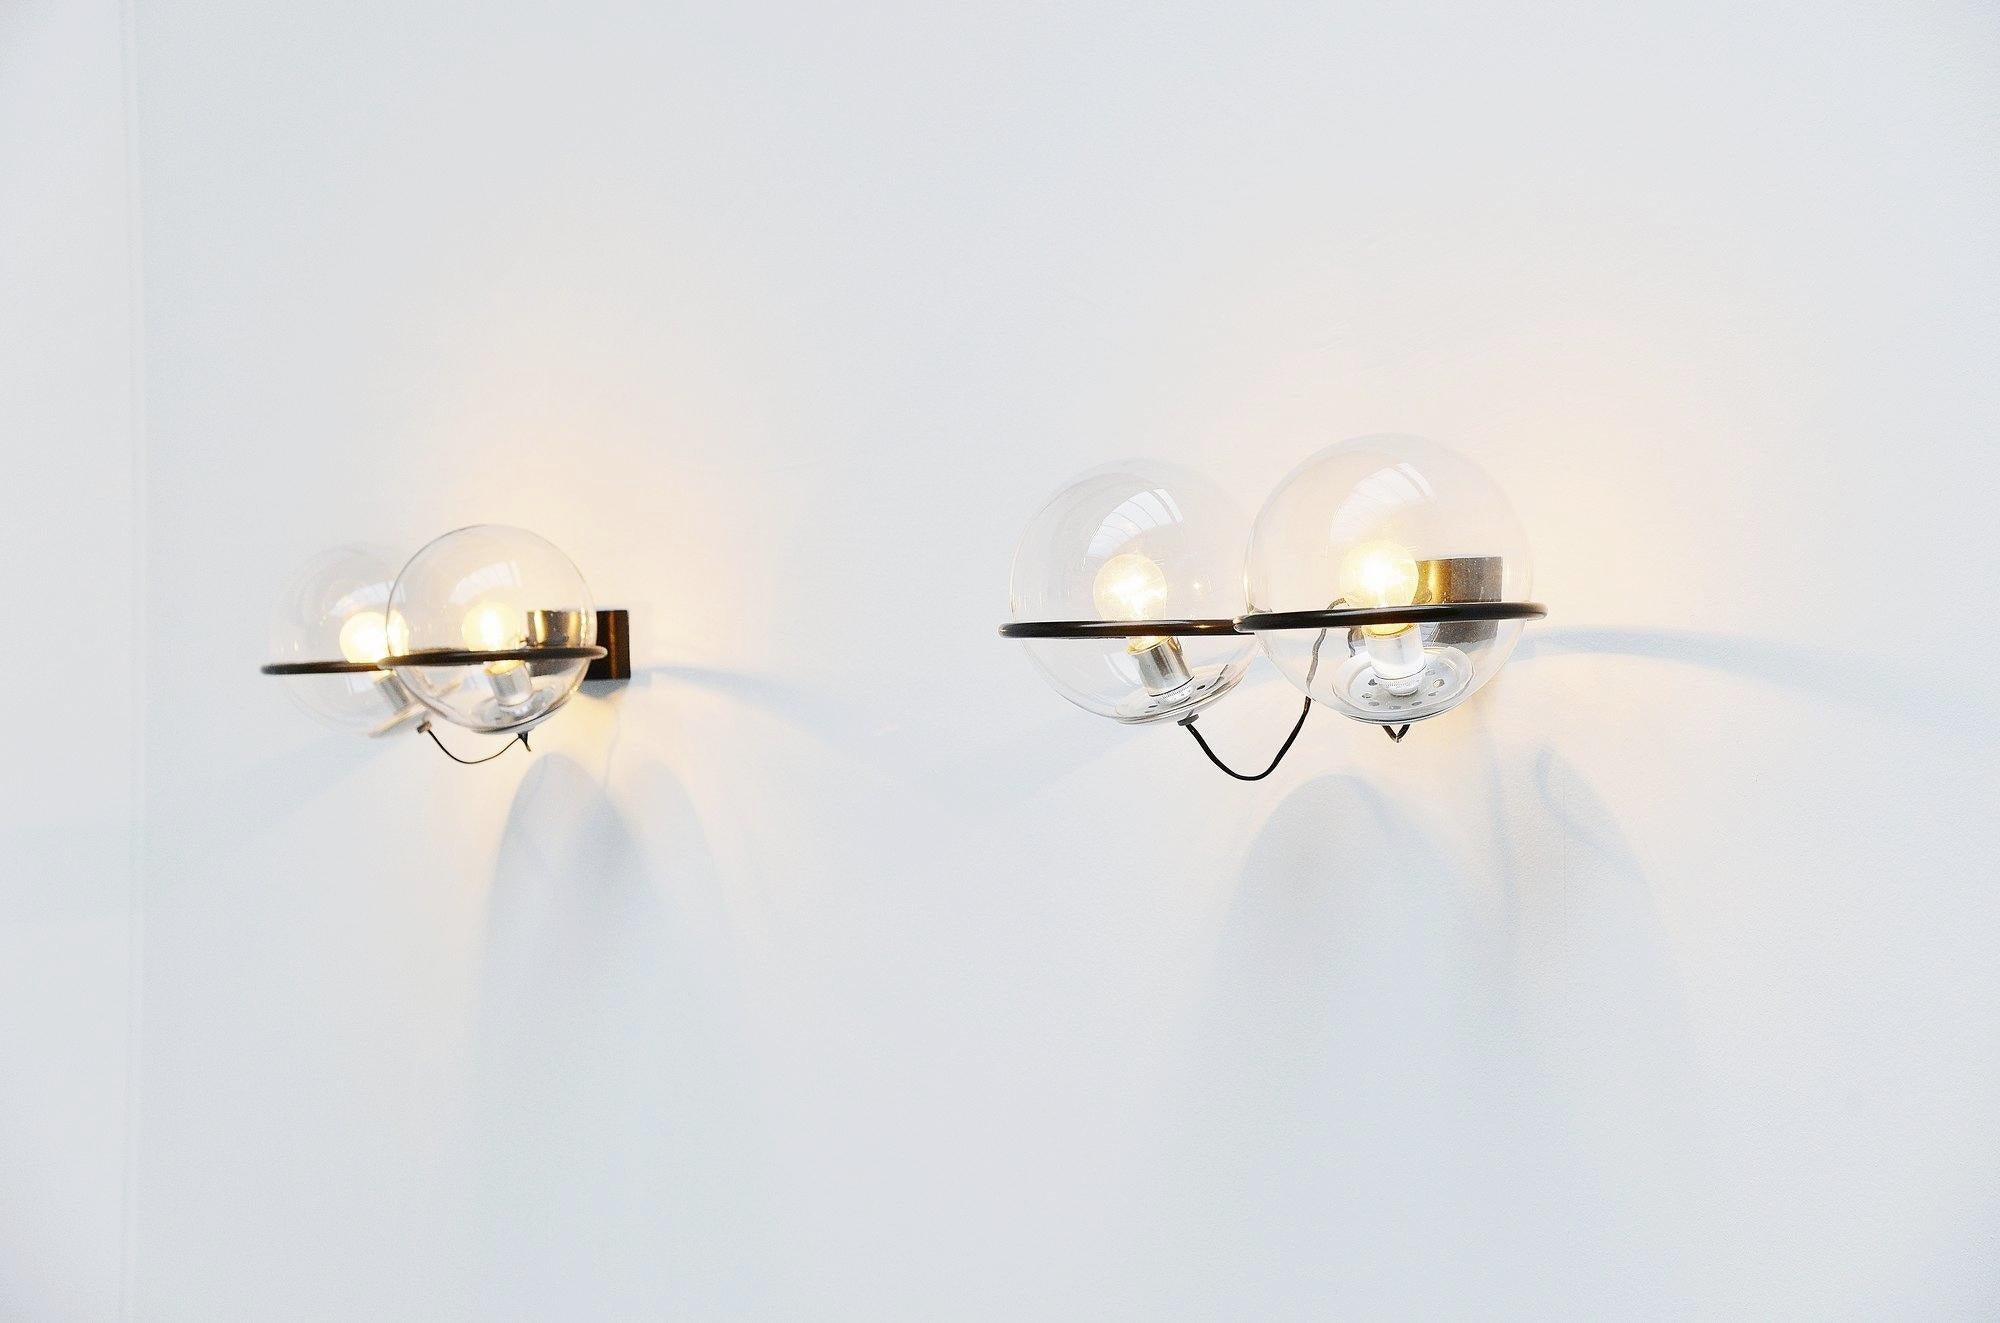 Cold-Painted Gino Sarfatti Wall Lamps Model 238/2 Arteluce, 1960 For Sale